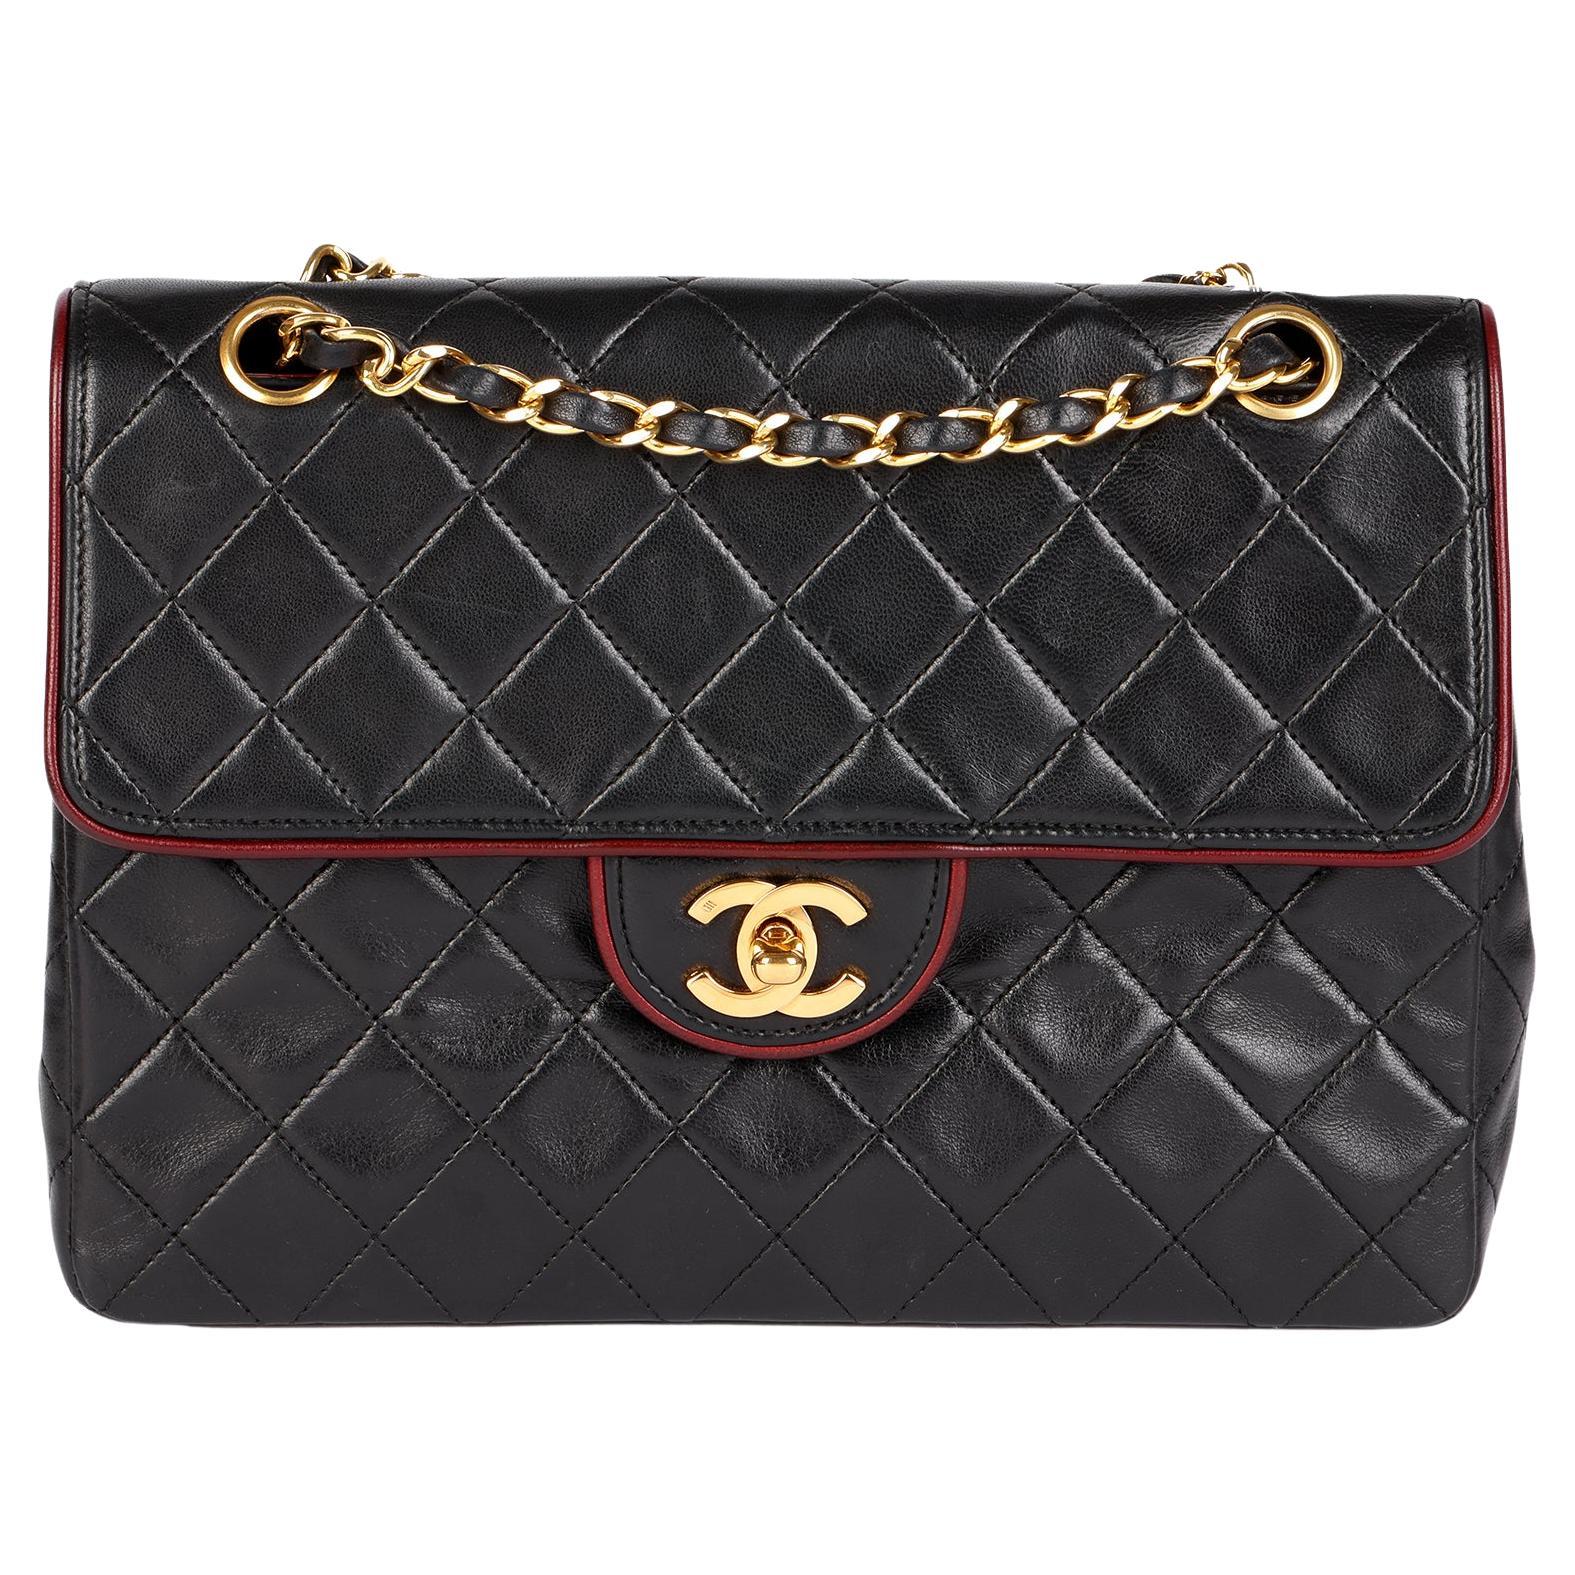 CHANEL Black Quilted Lambskin Vintage Medium Classic Single Flap Bag with Red Tr For Sale